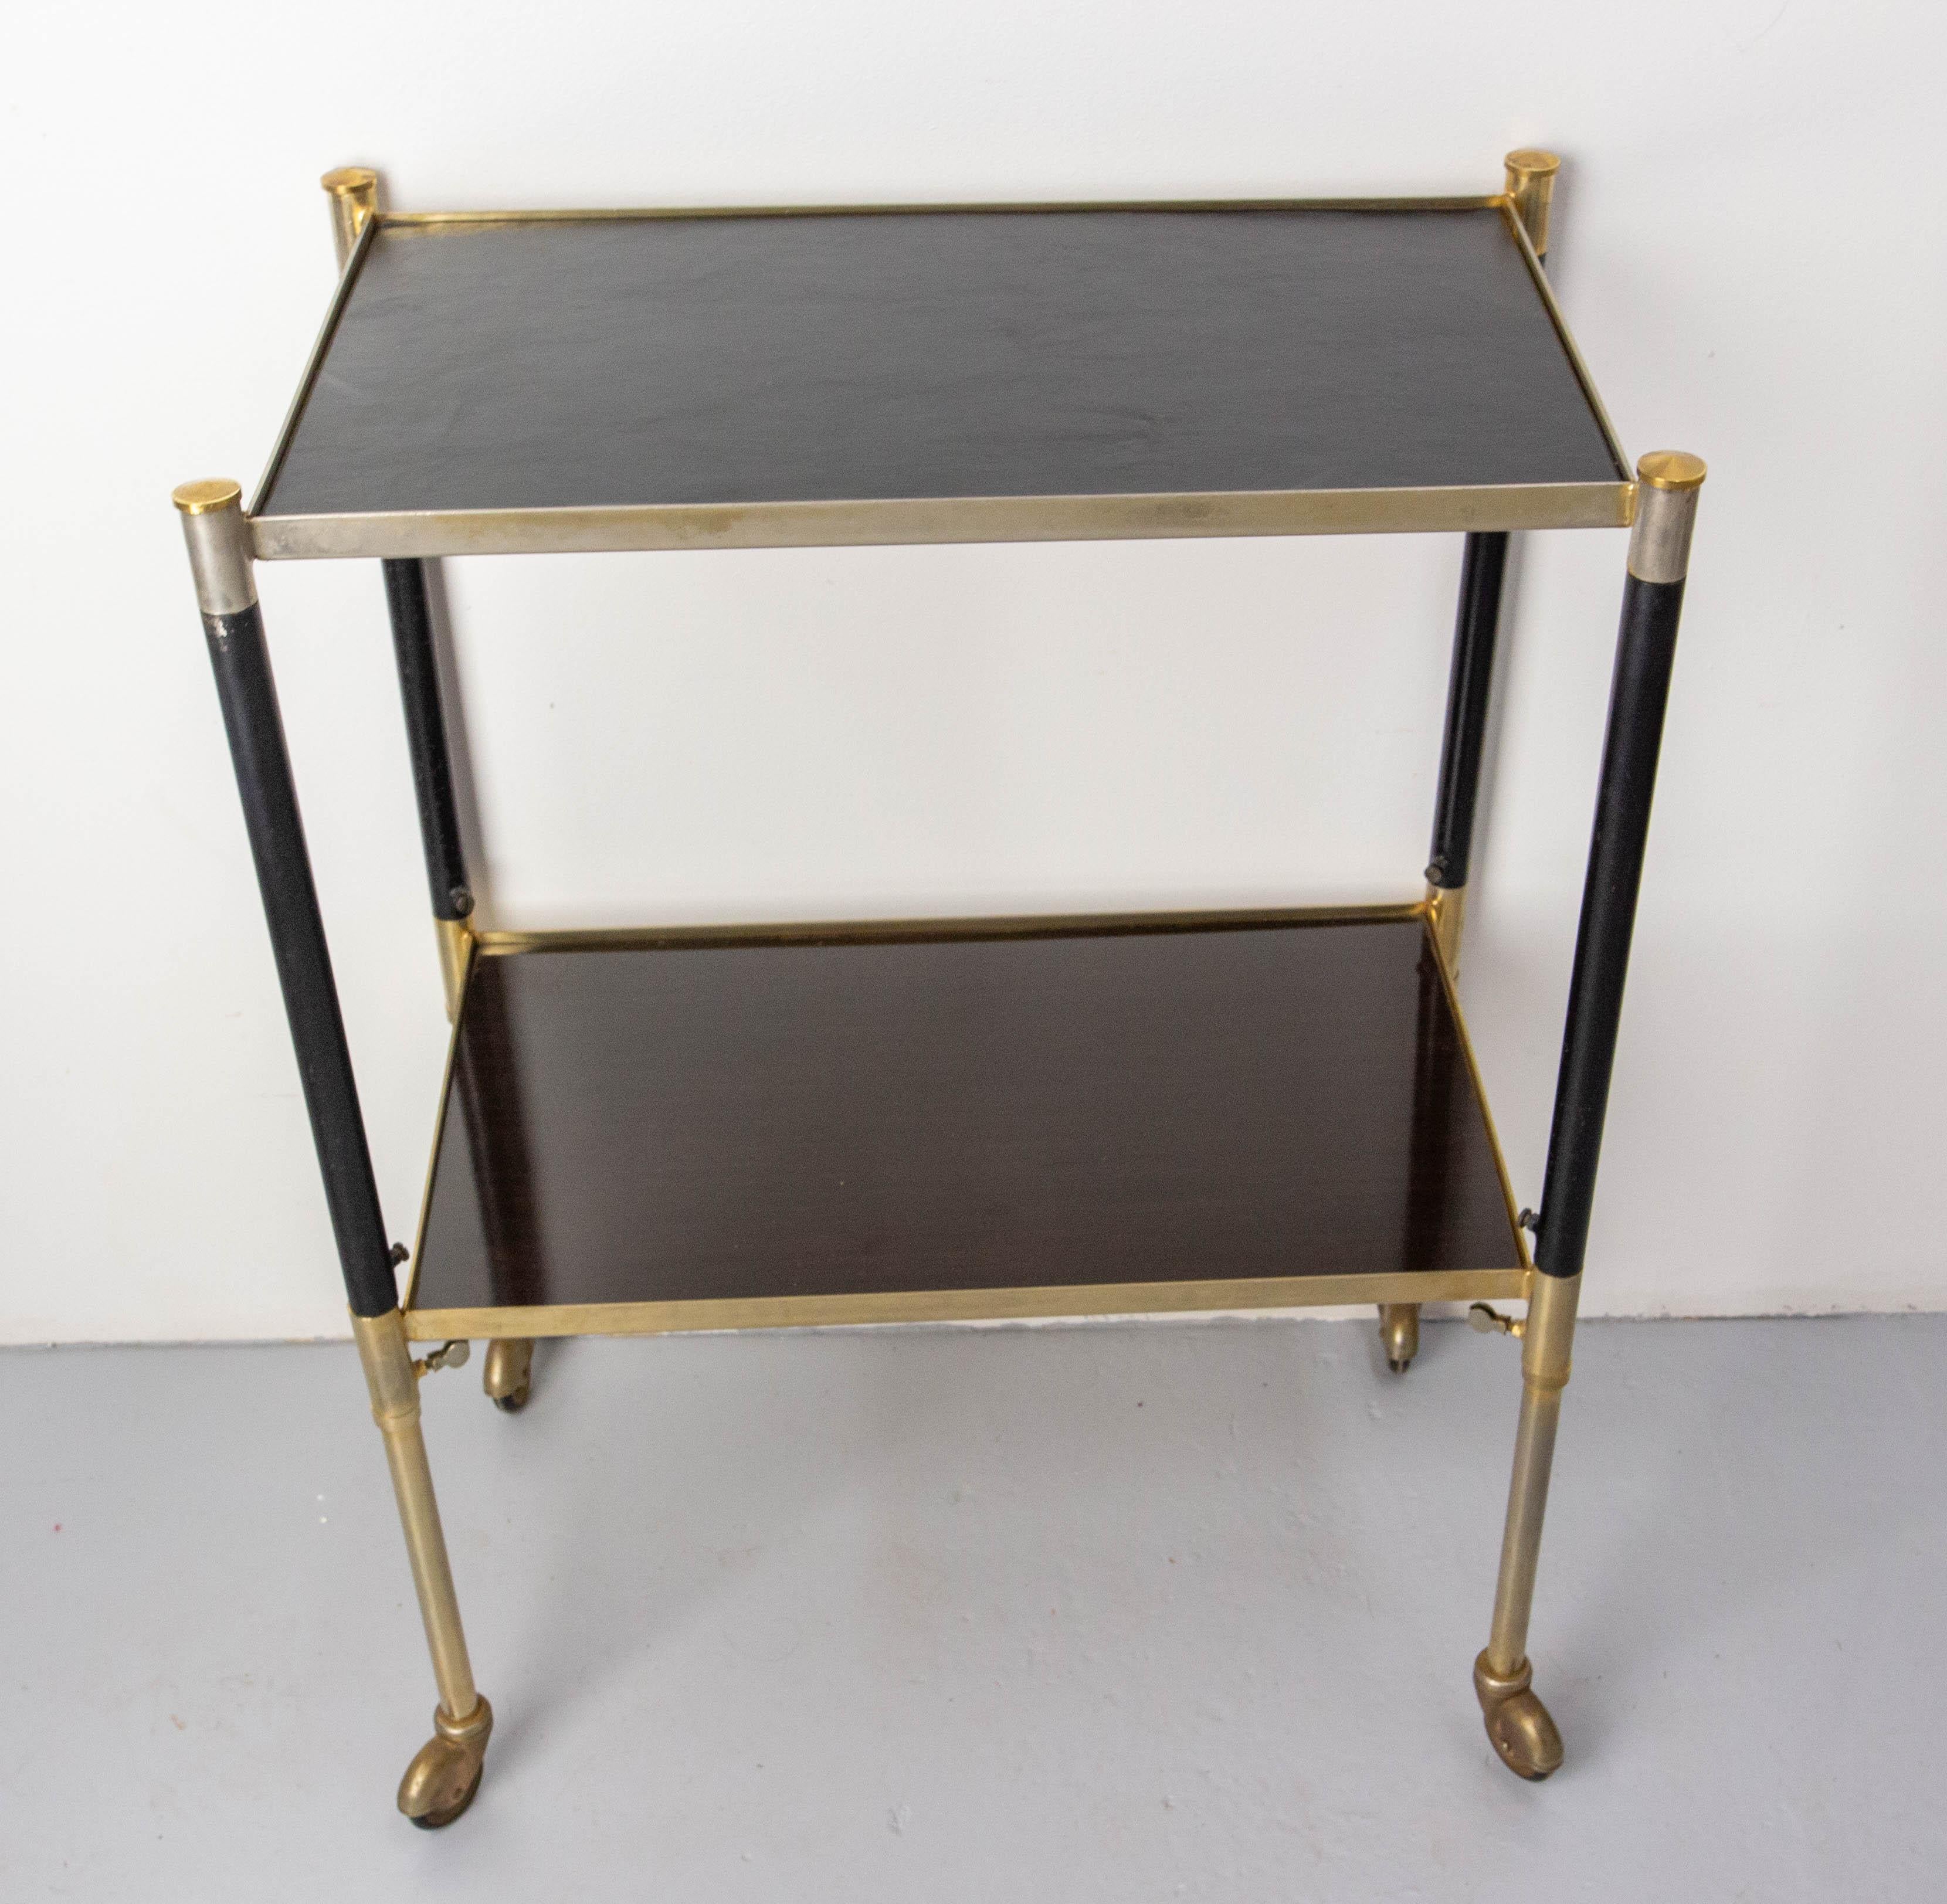 Vintage wood, leather and brass dessert trolley, height adjustable.
The top tray is recovered of natural leather, and the low tray is in wood recovered of a polyester varnish 
Characterful marks of use.
French, circa 1960.
Delivered